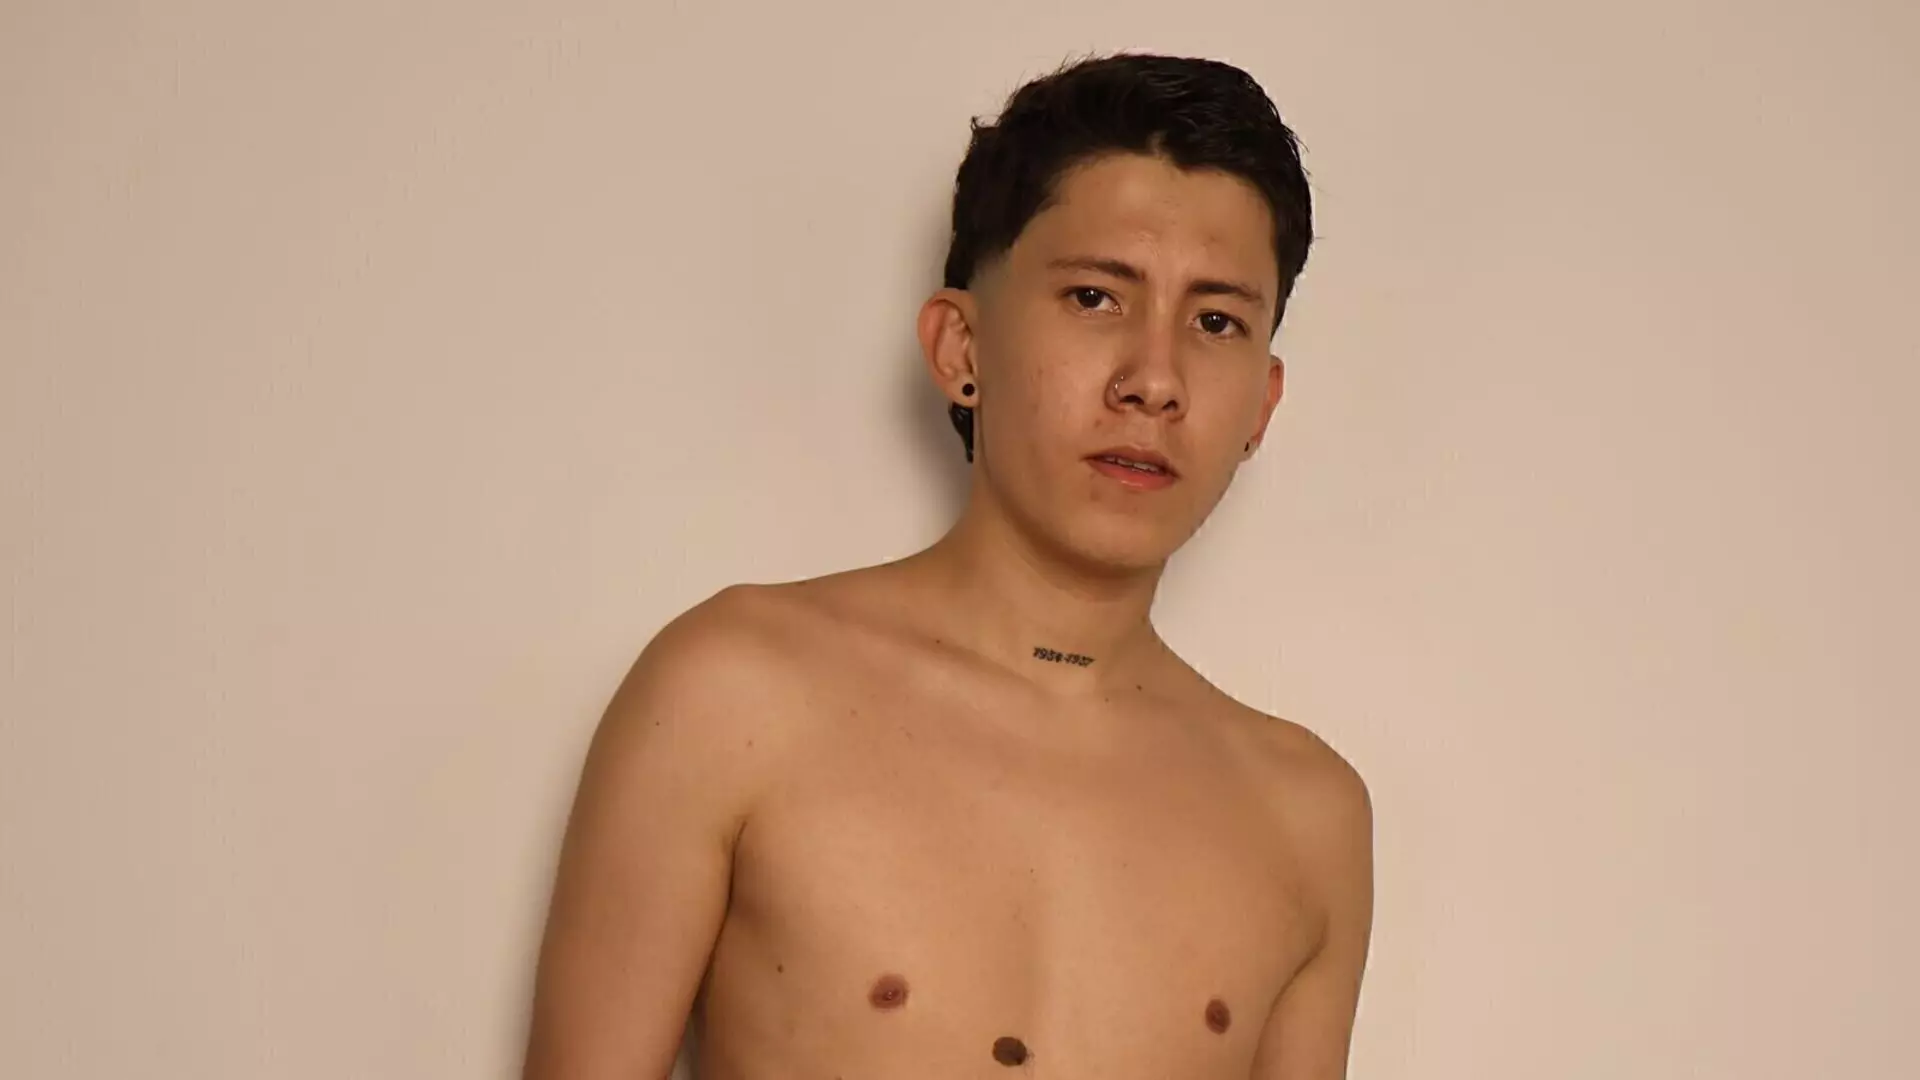 ZackJagger's Live Nude Chat